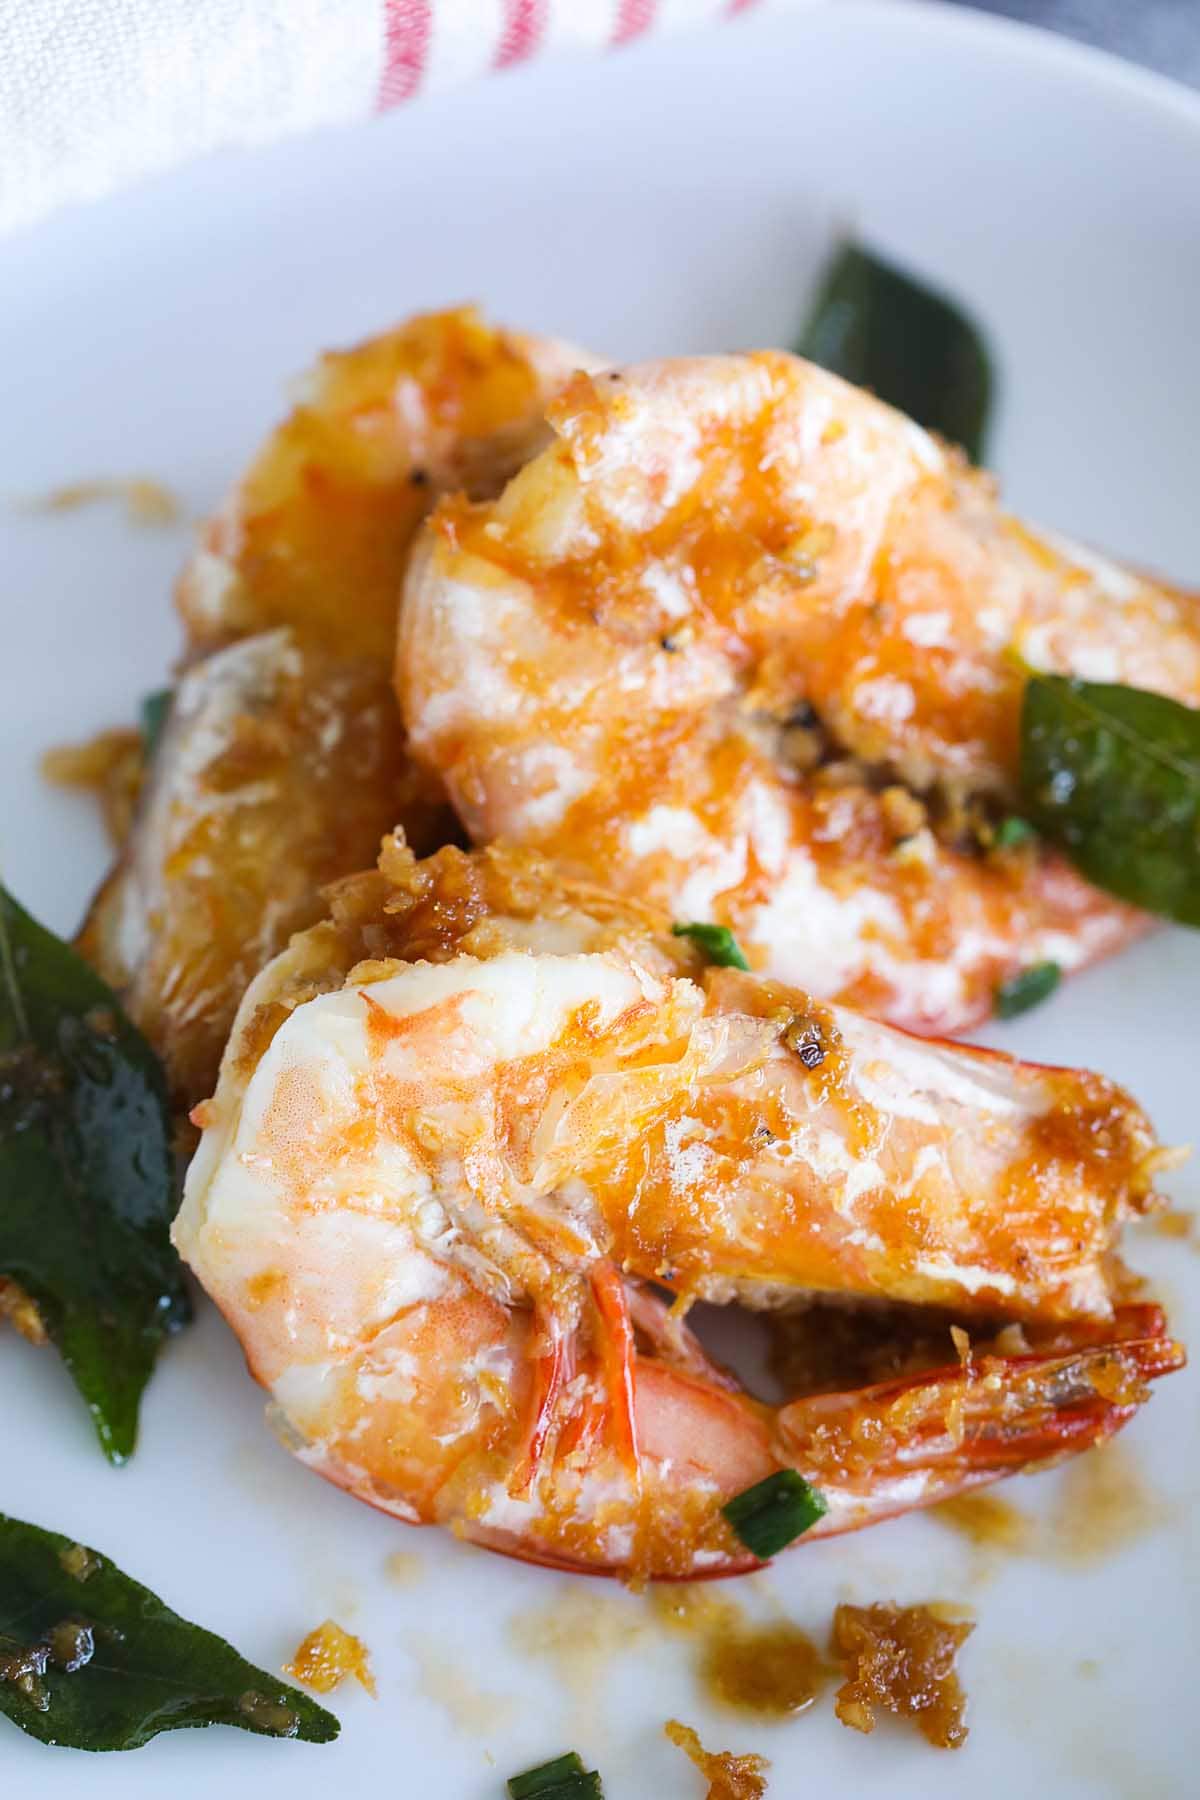 Authentic butter prawn with green curry leaves.